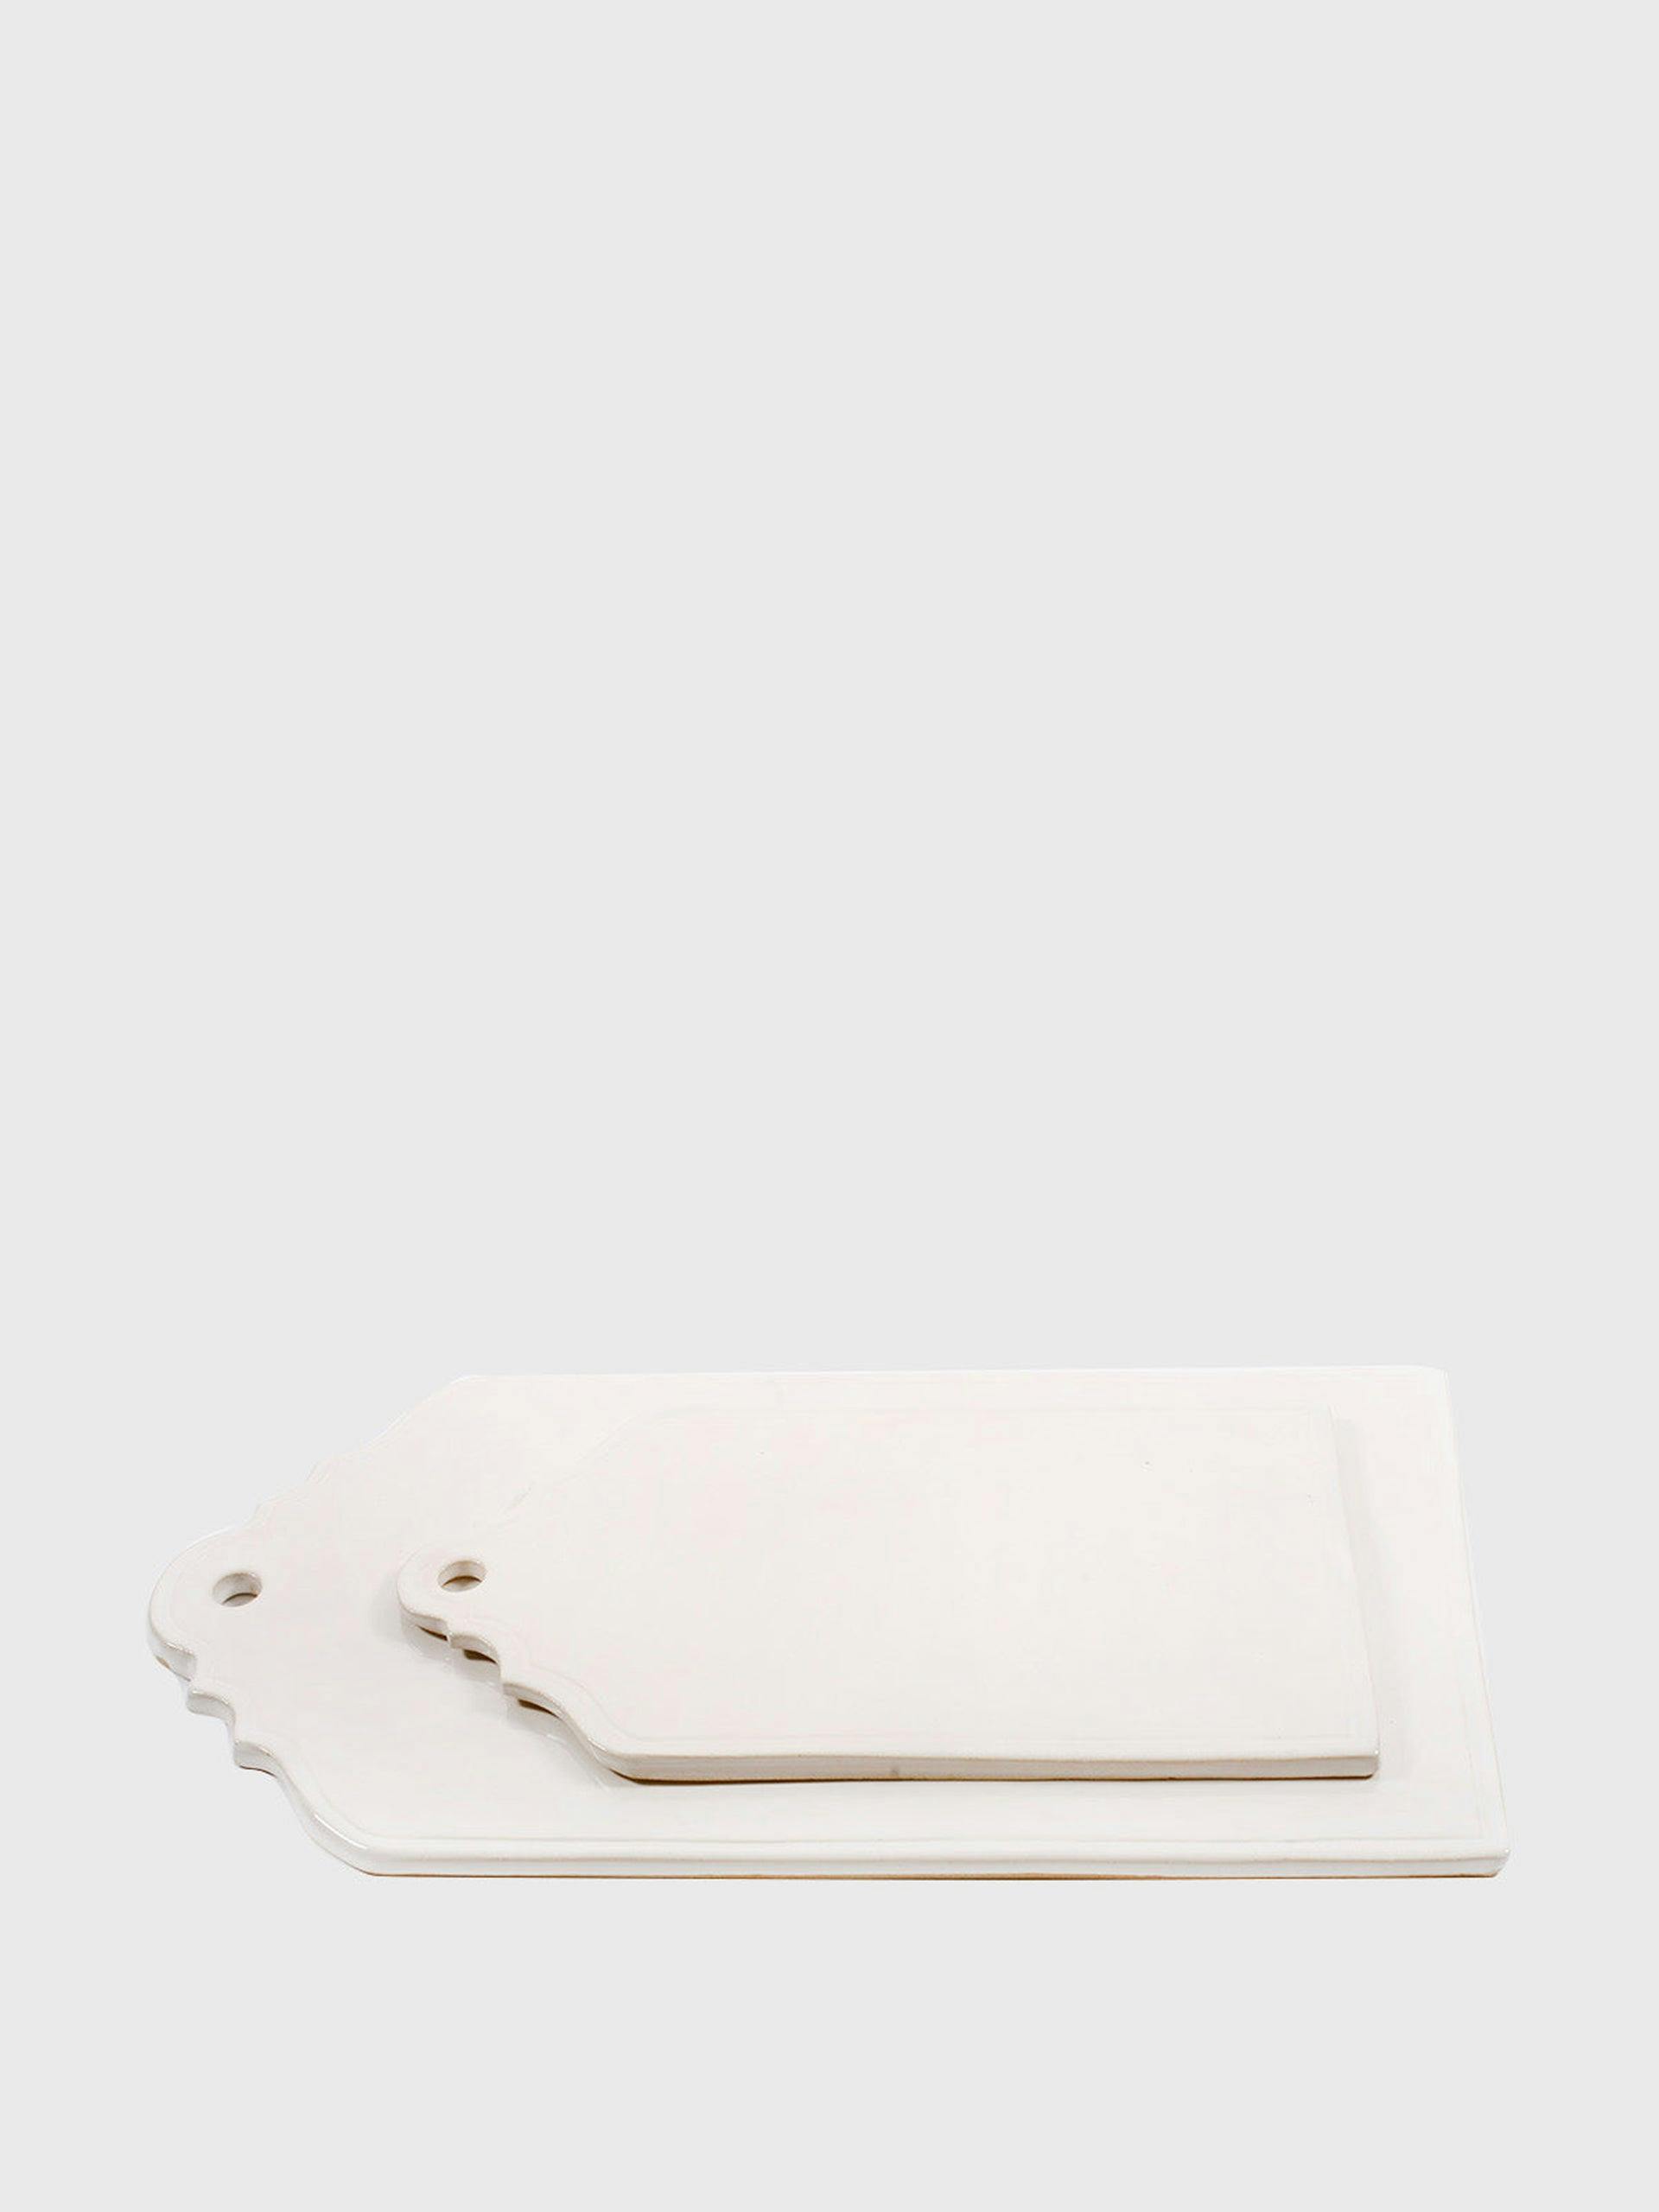 Large white ceramic cheese board